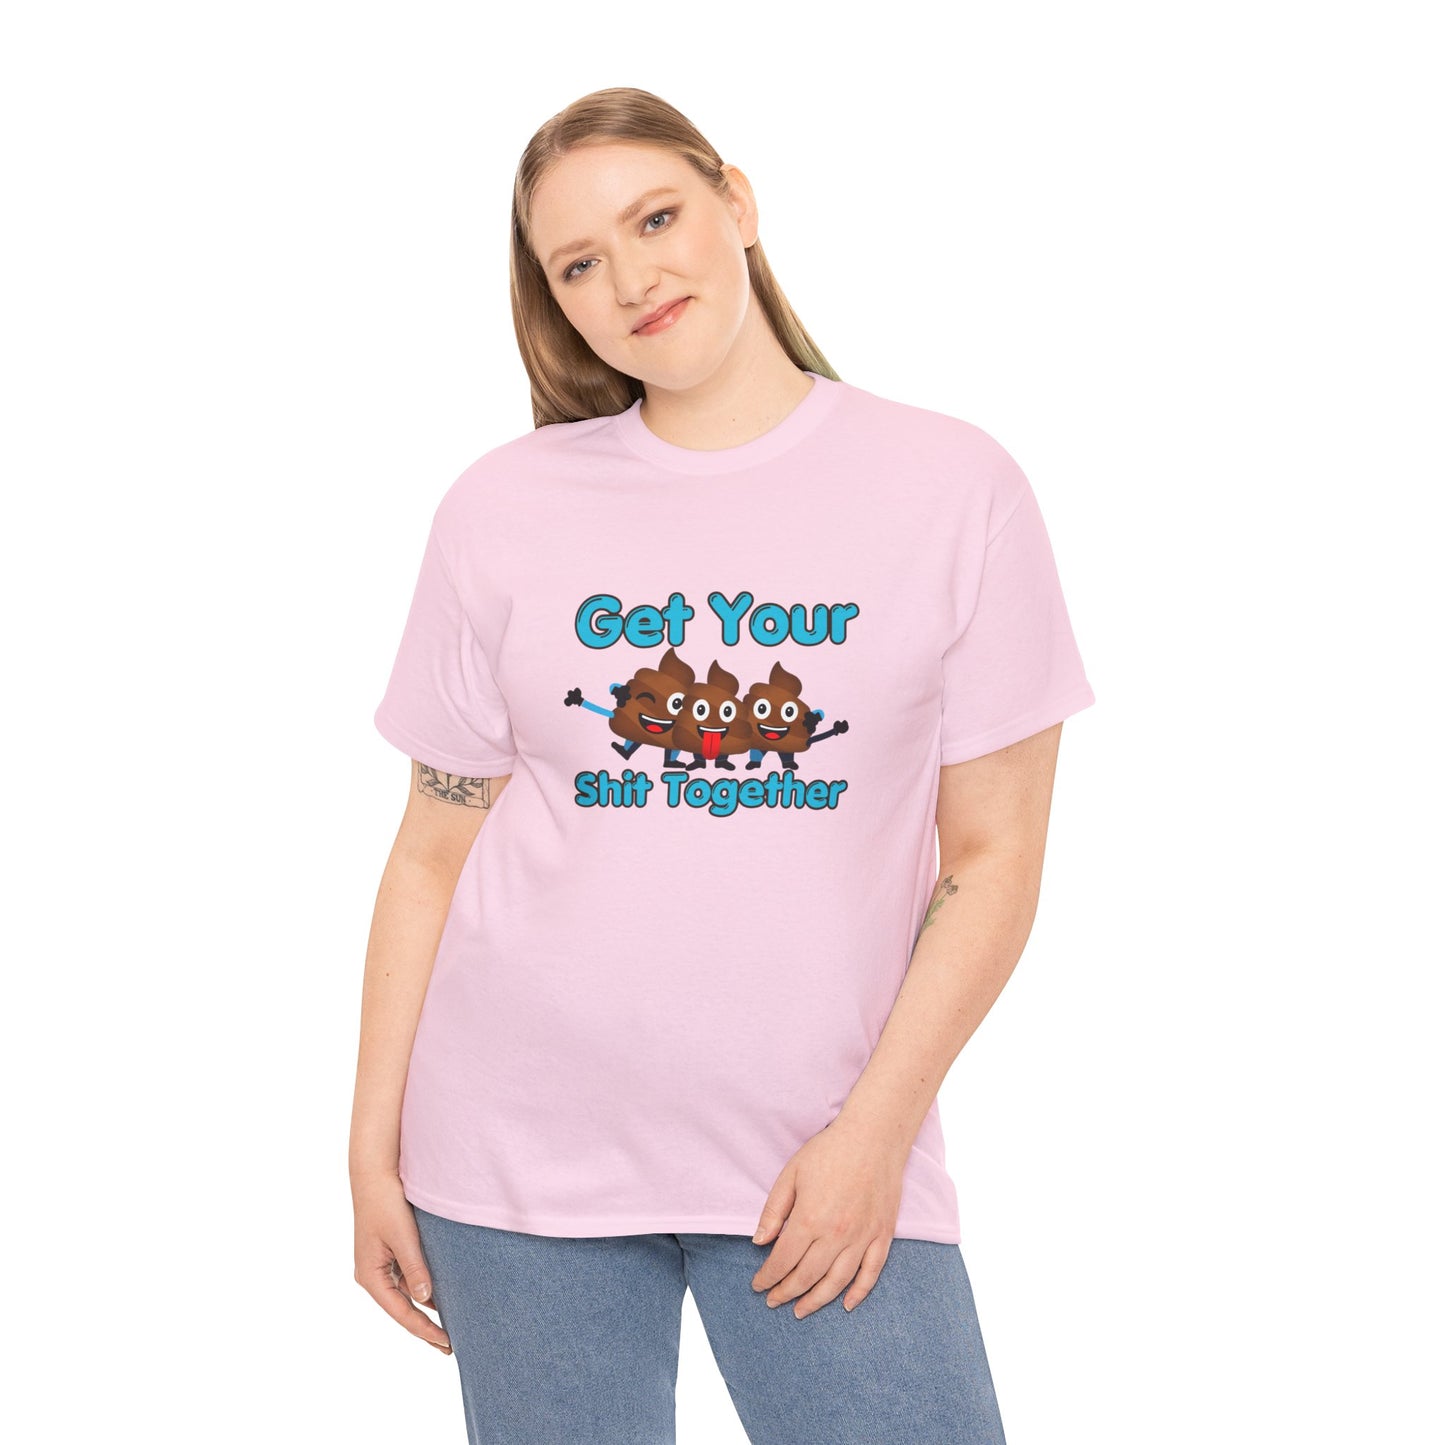 Get Your Shit Together, Funny Poop Emojis, Dad Shirt, Pun t-shirt, Potty Humor, Hilarious Dad Gift, Funny Father's day Gift, edgy, Fun shirt